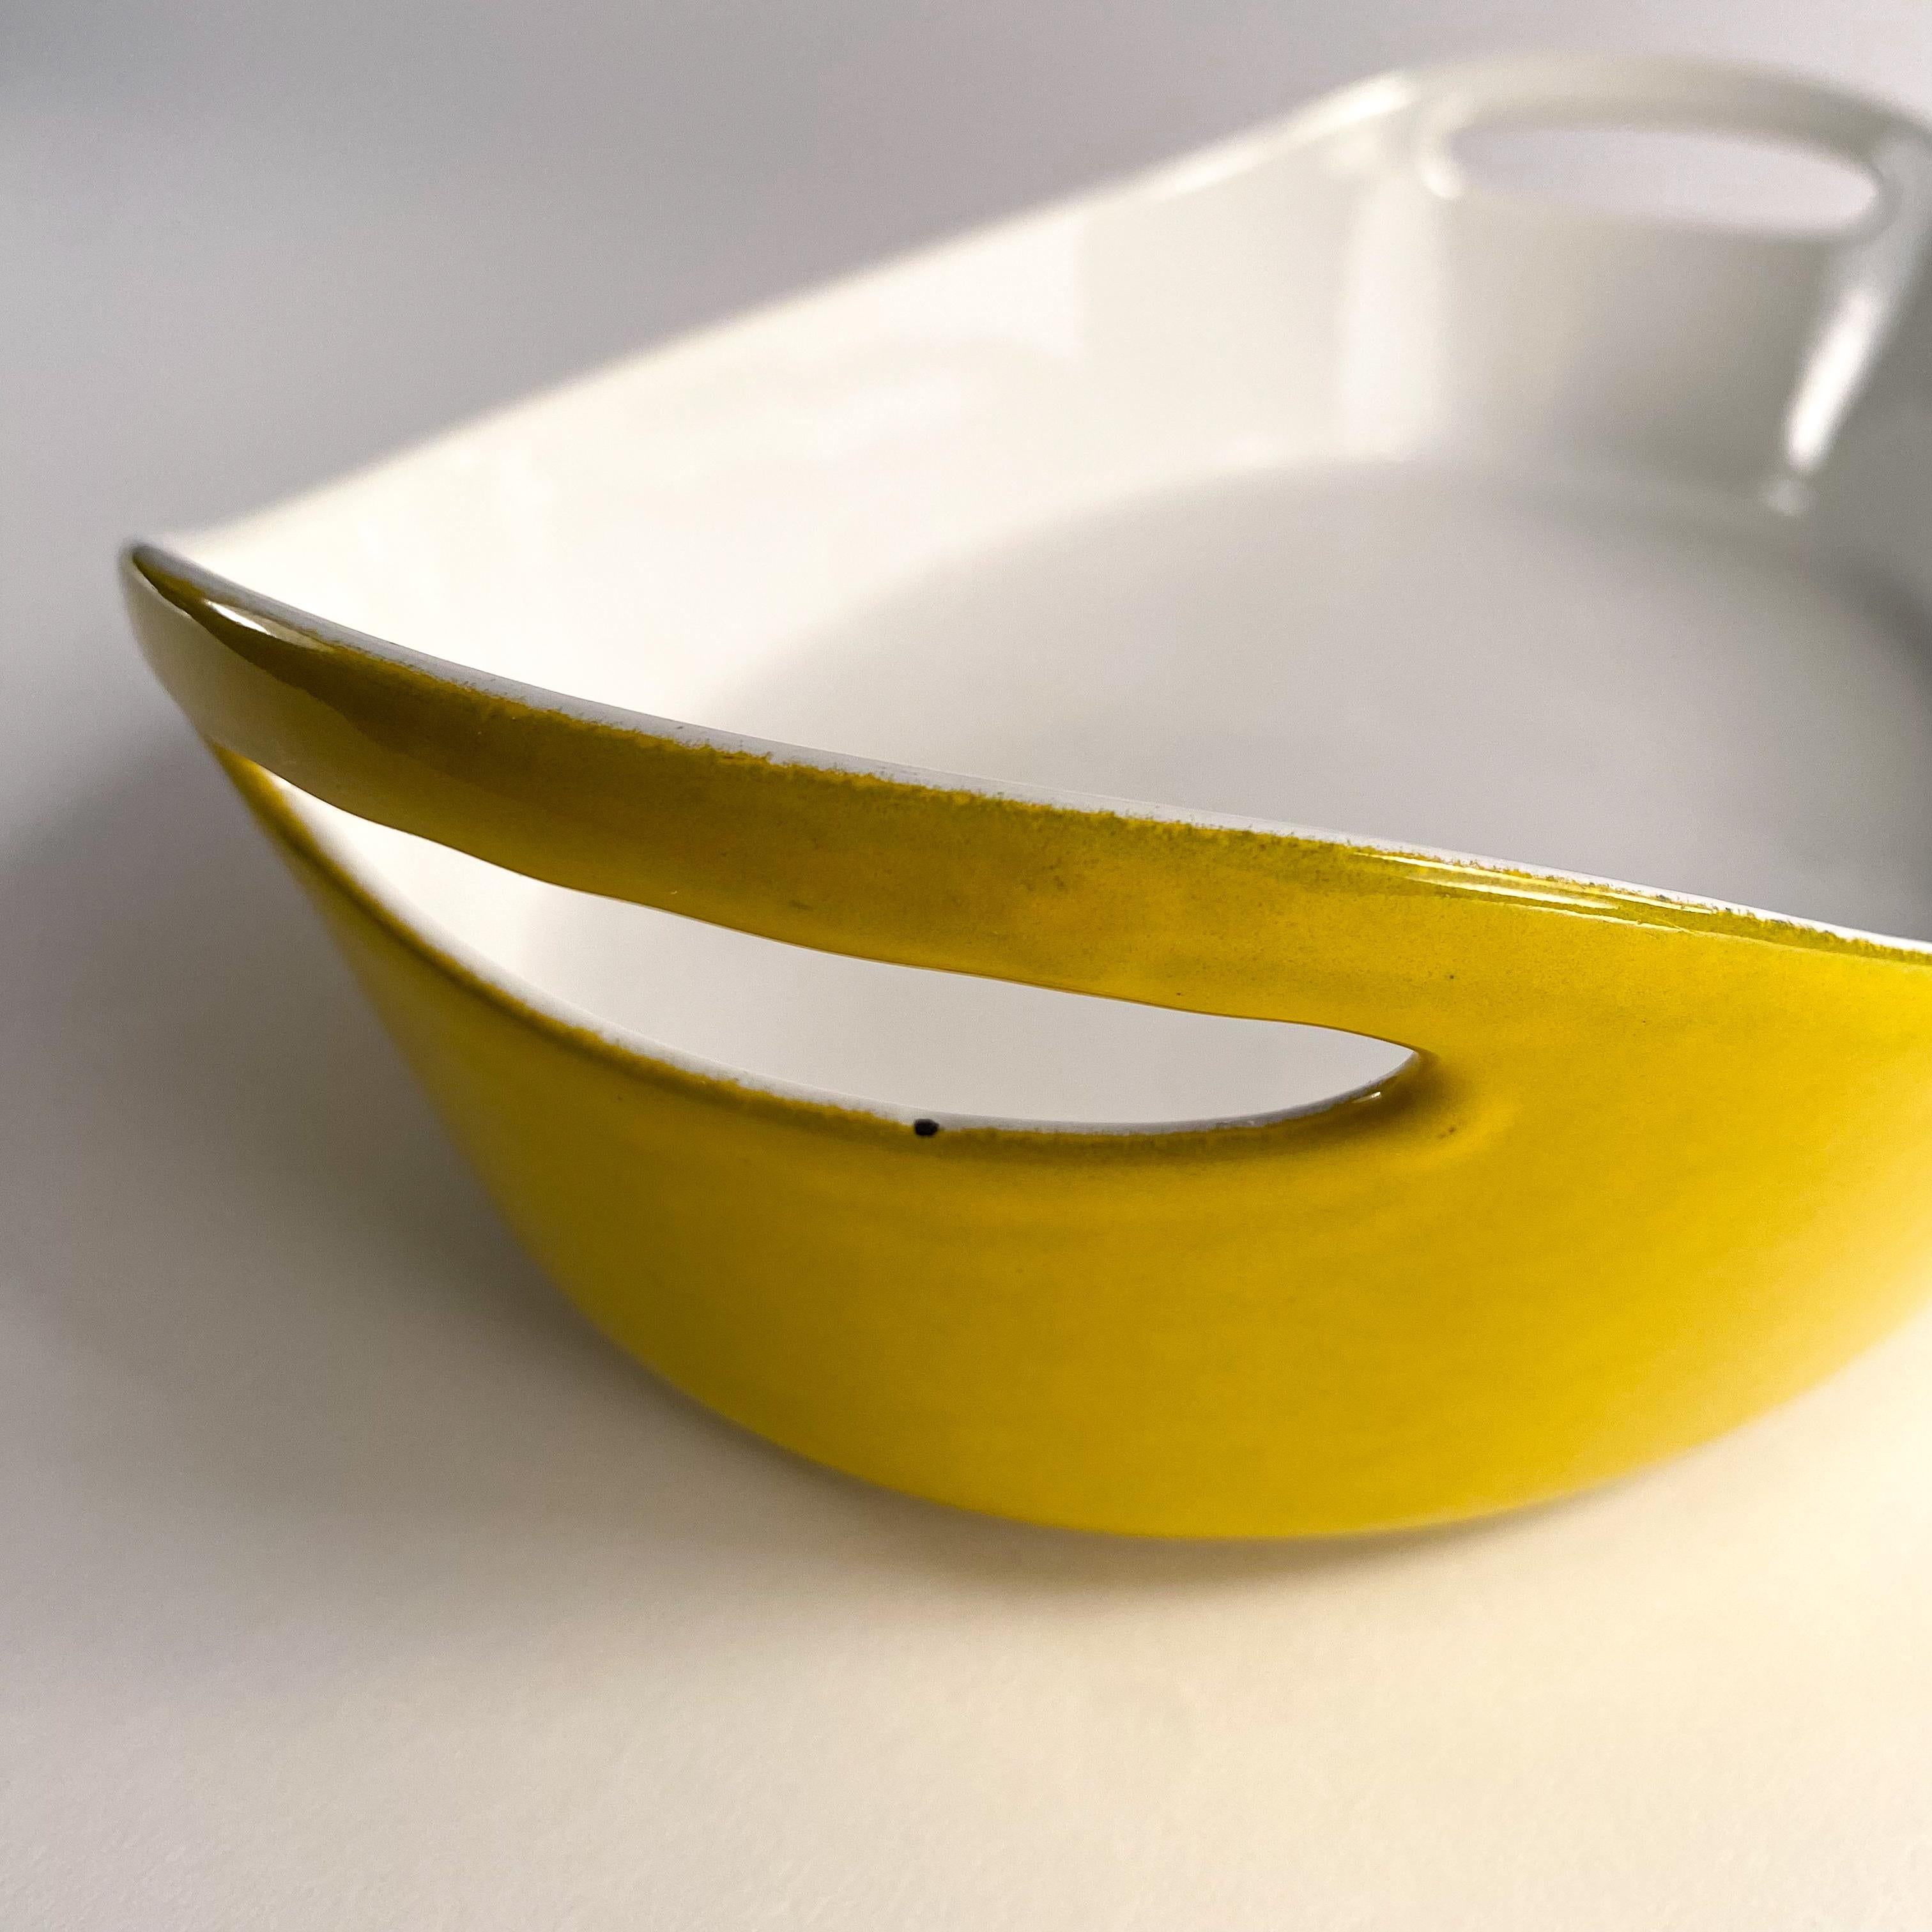 vintage yellow enameled castiron casserole dish by Michael Lax for Copco For Sale 3